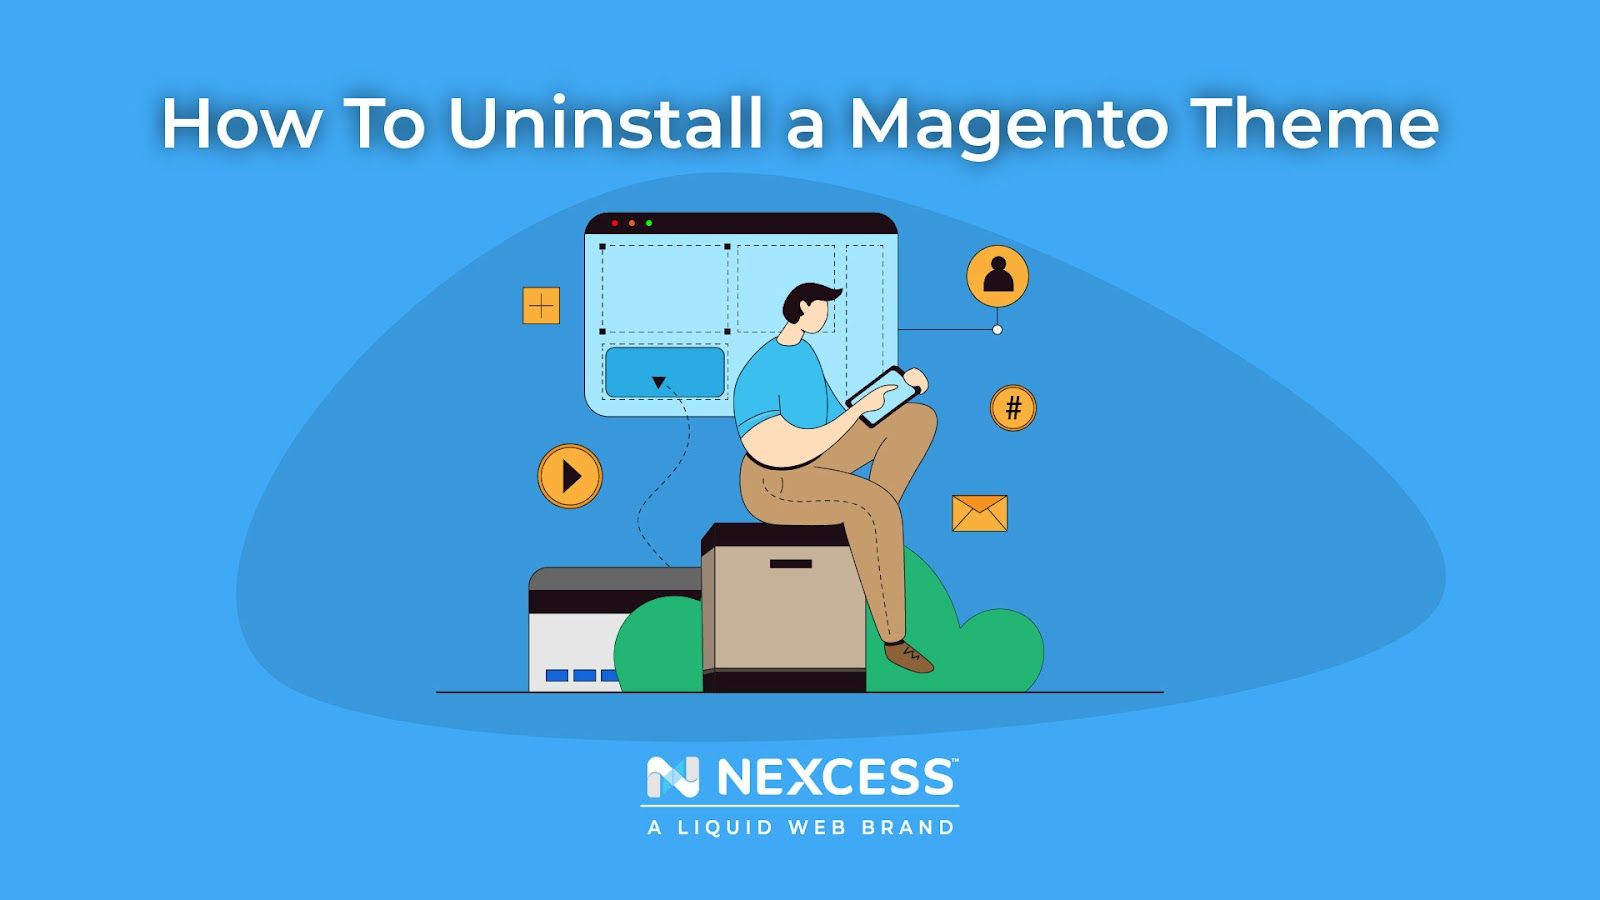 How to uninstall a Magento theme.